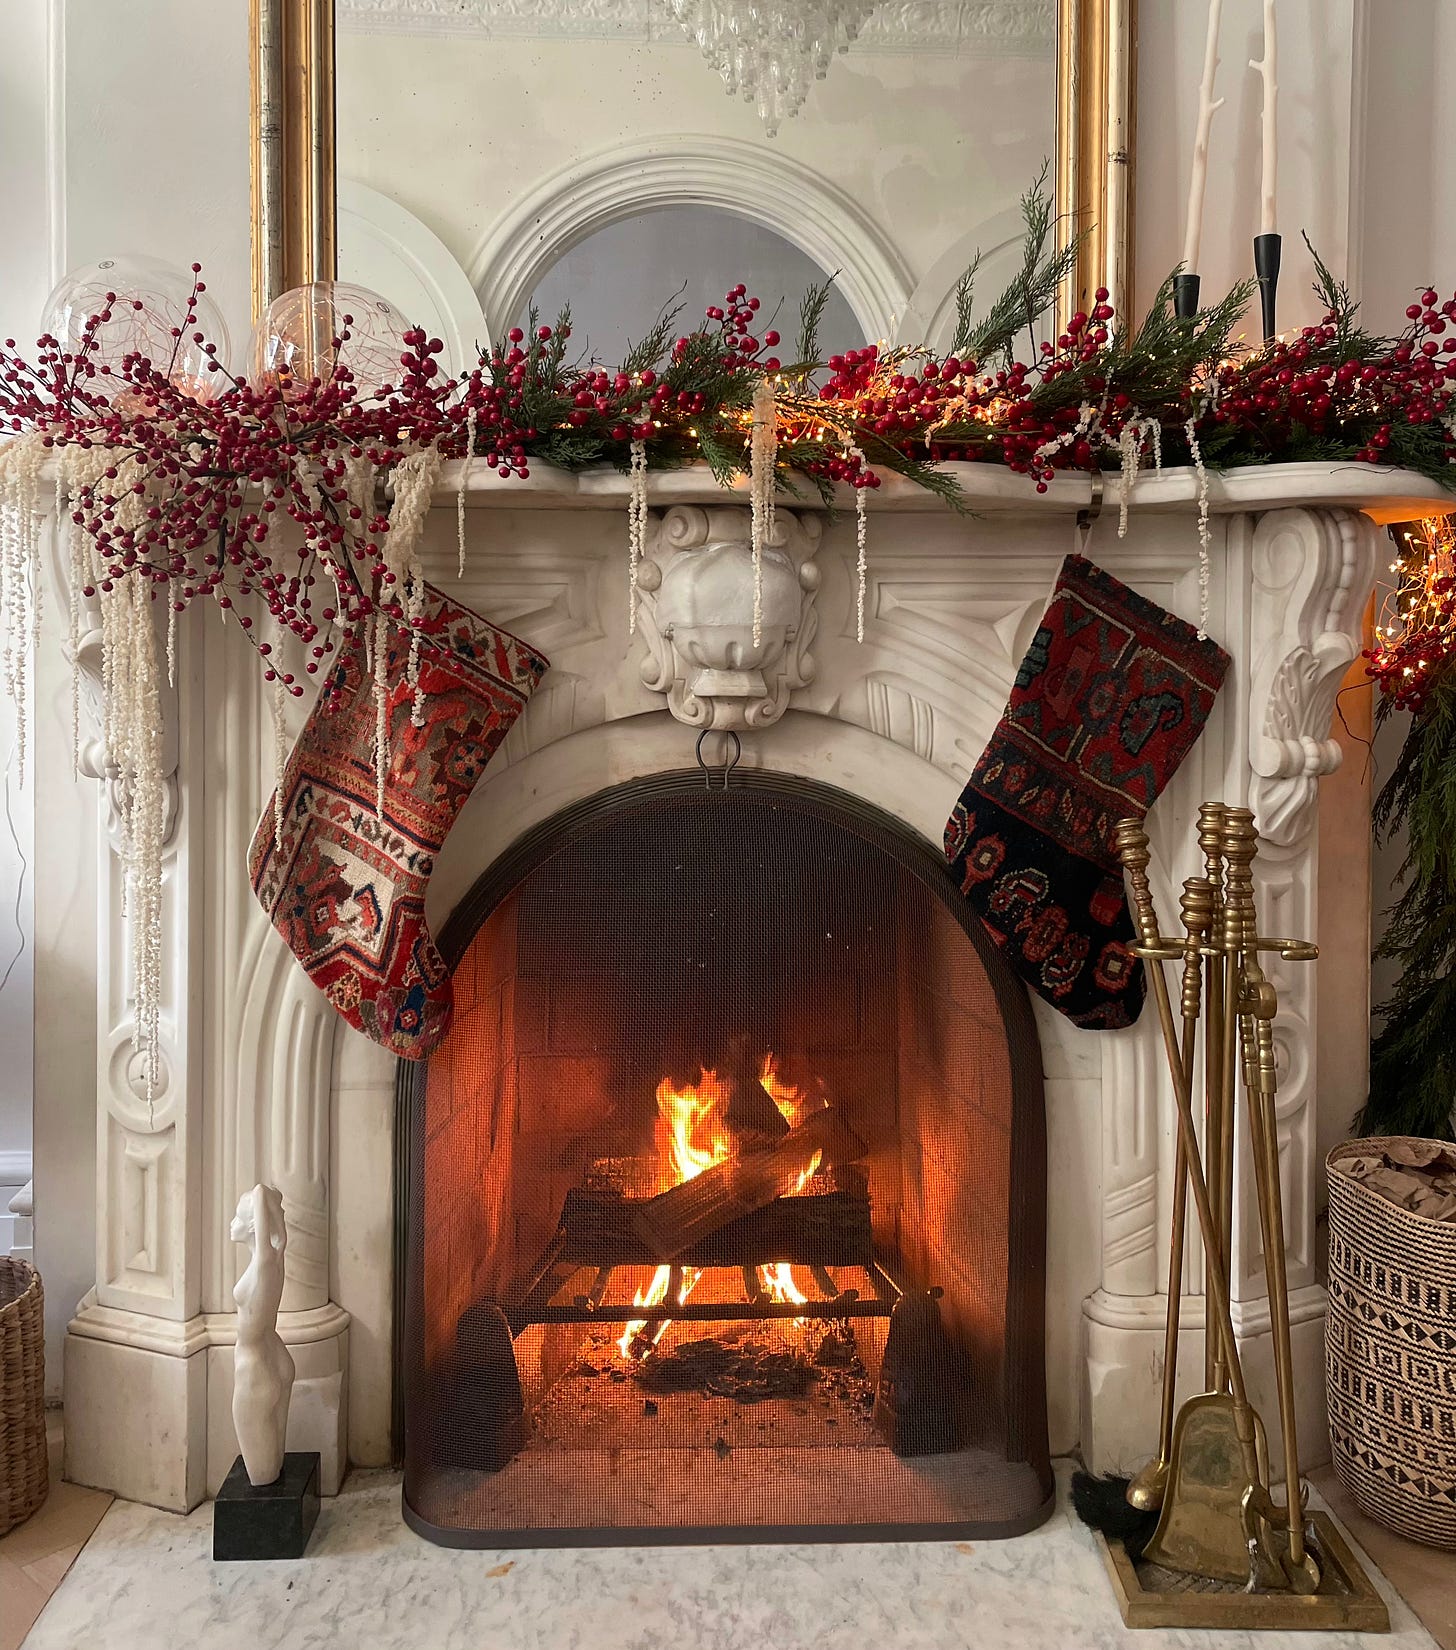 An ornate marble fireplace is decorated for Christmas: red berries, pine boughs, pearls and twinkle lights adorn the mantle, along with two large stockings made from North African textiles. In the fireplace, a fire glows.